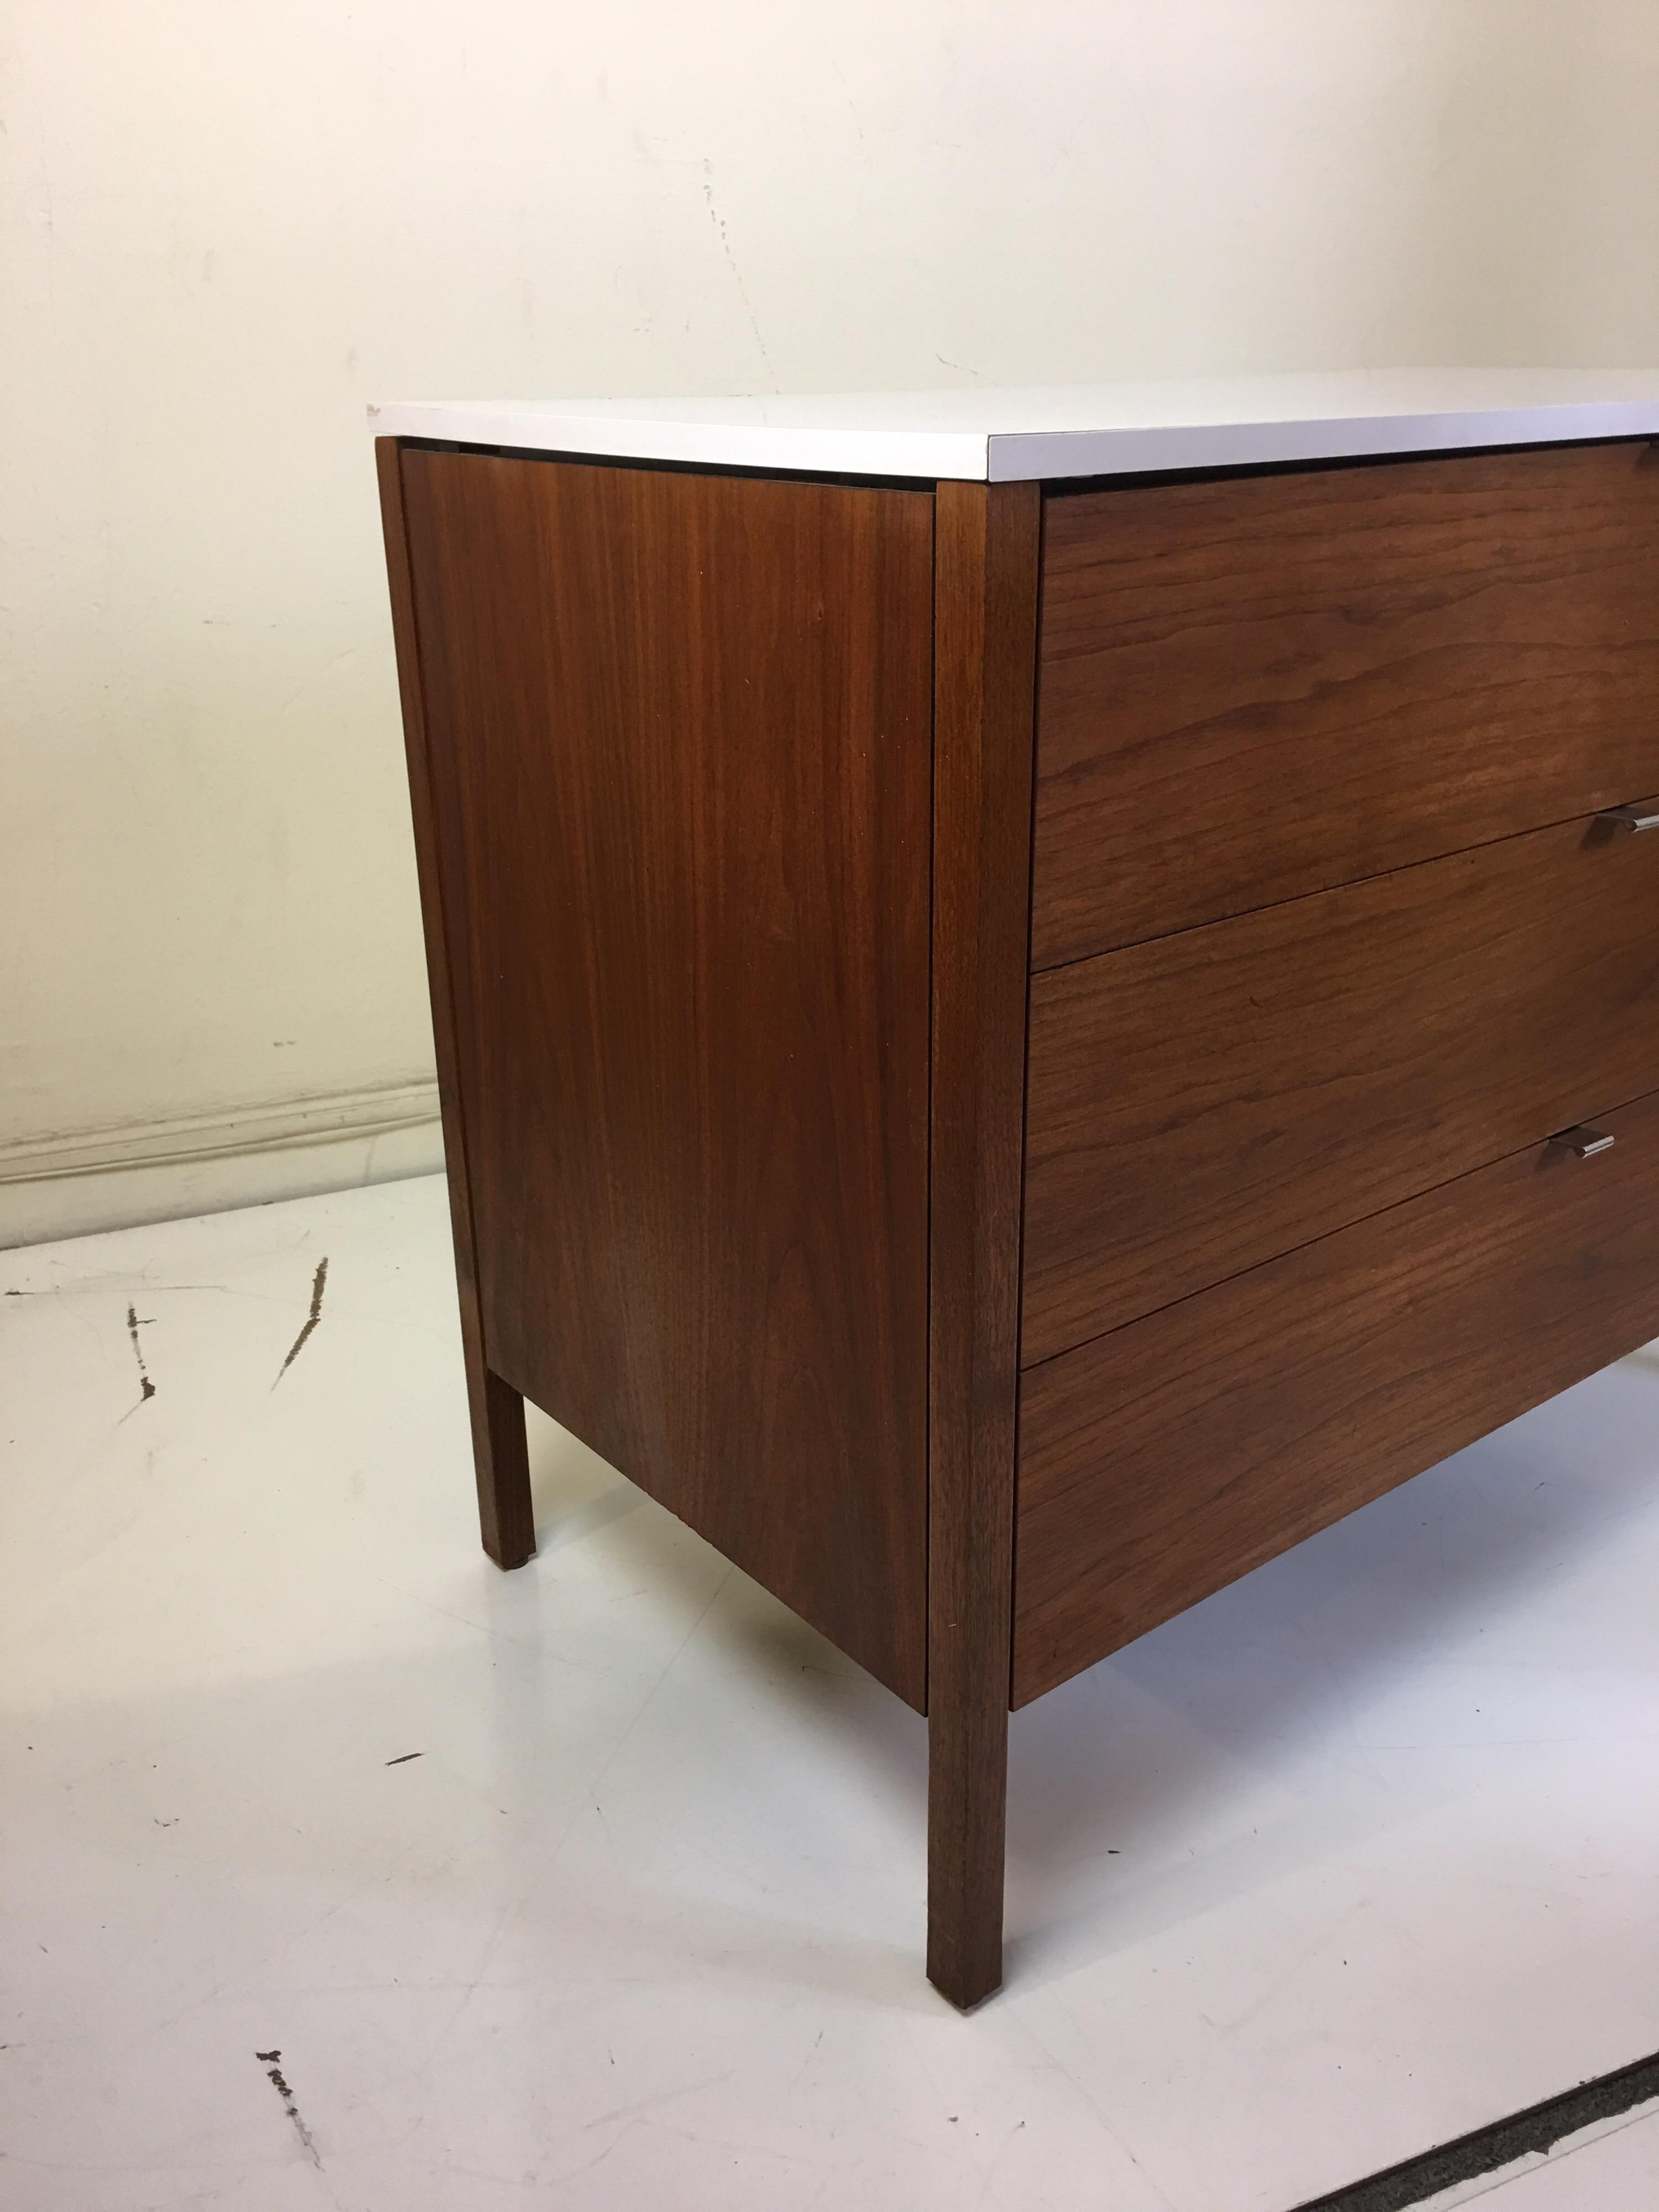 Florence Knoll for Knoll International dresser in walnut with chrome drawer pulls and white laminate top.